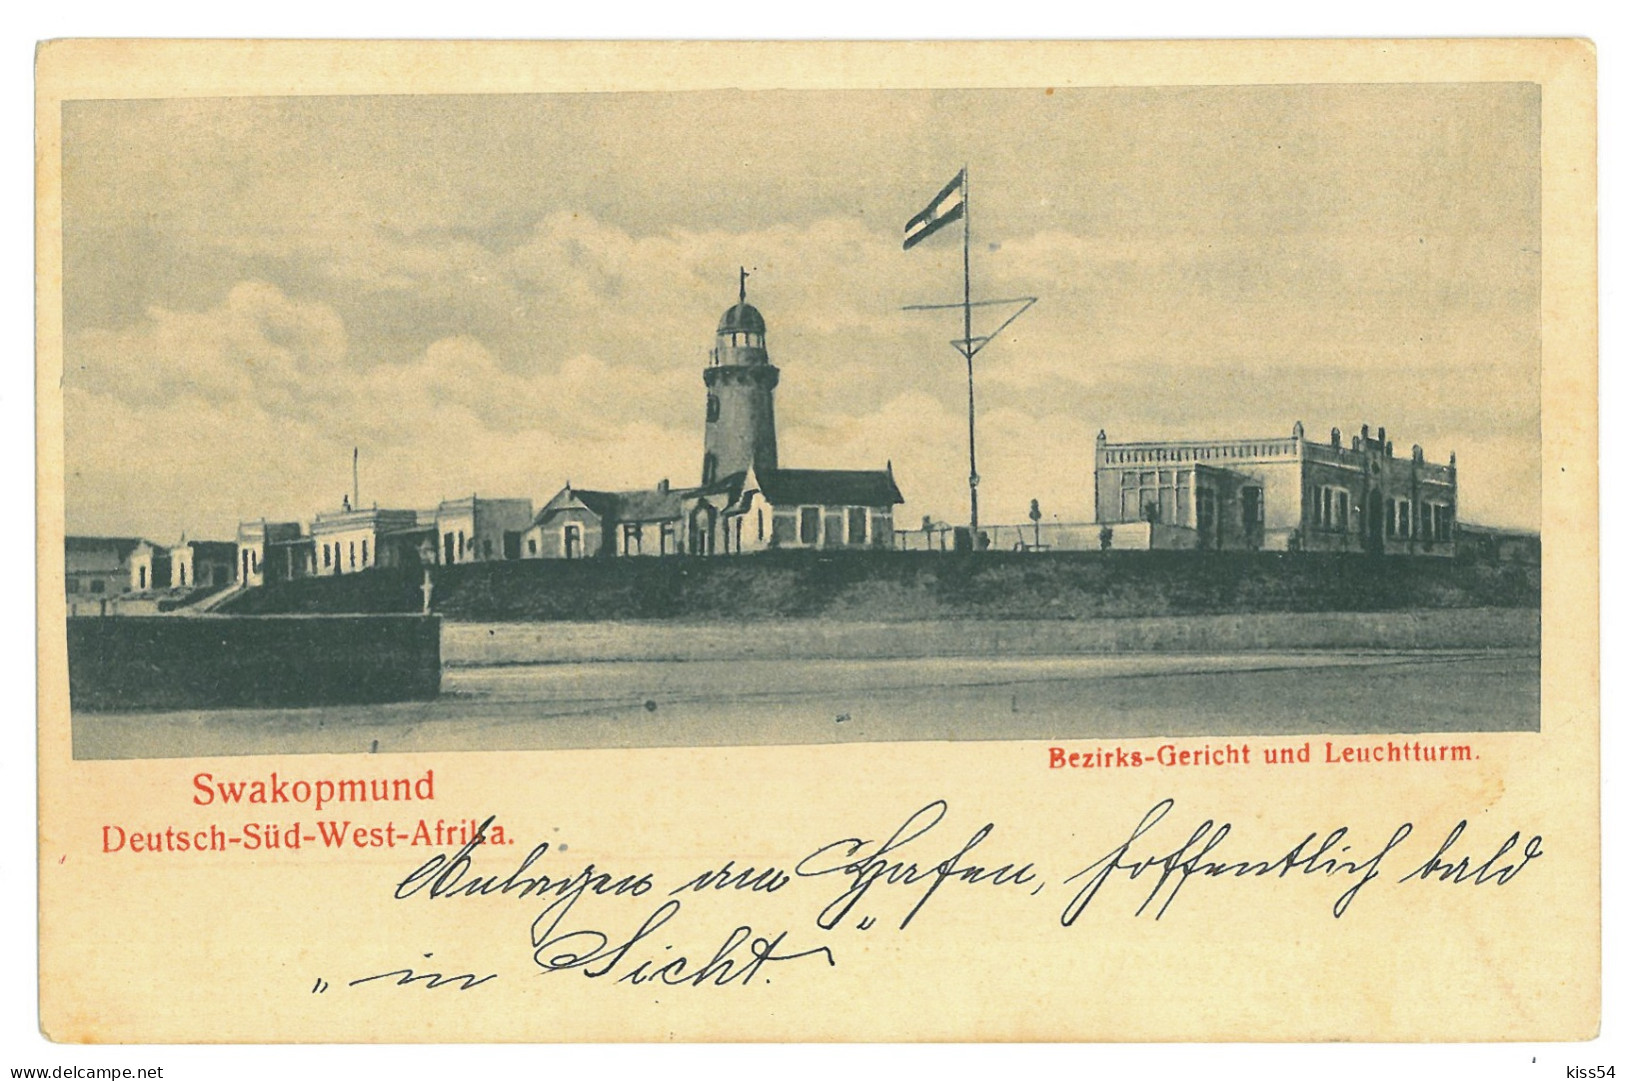 NAM 8 - 23807 SWAKOPMUND, The Courthouse And The Lighthouse D.S.W. Afrika, Namibia - Old Postcard - Unused - Namibia